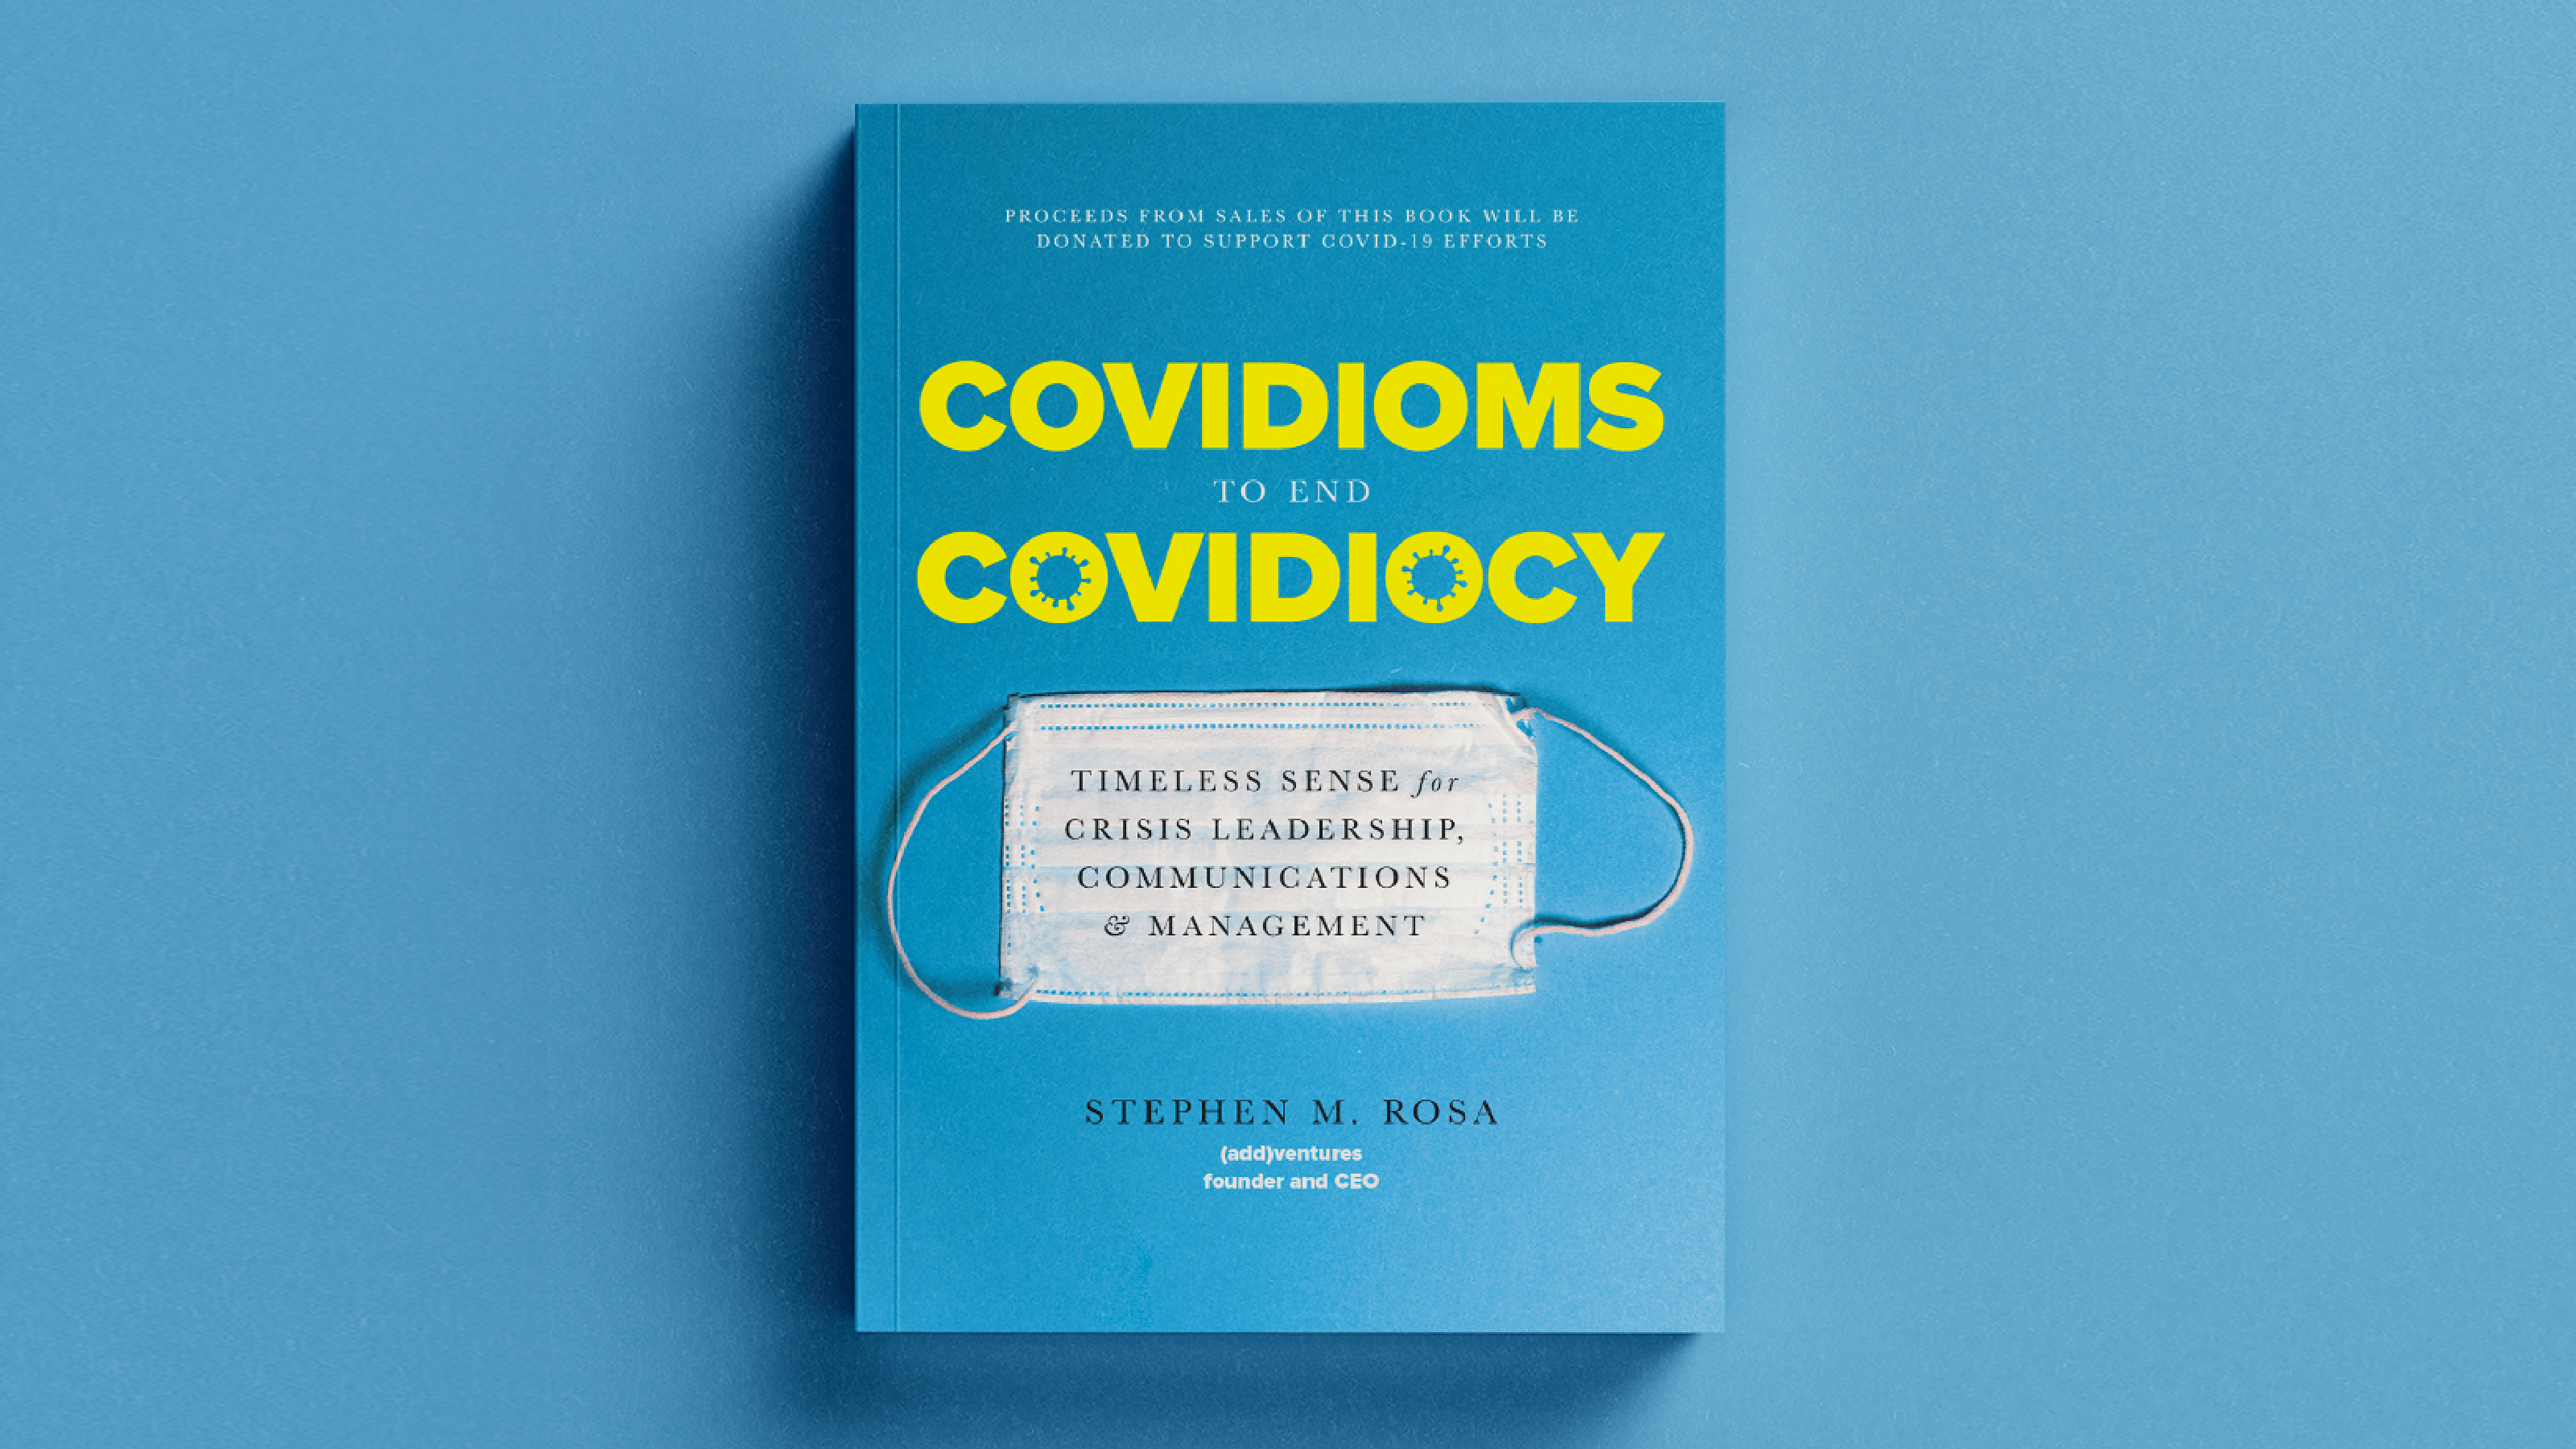 Covidioms To End Covidiocy by Stephen M. Rosa